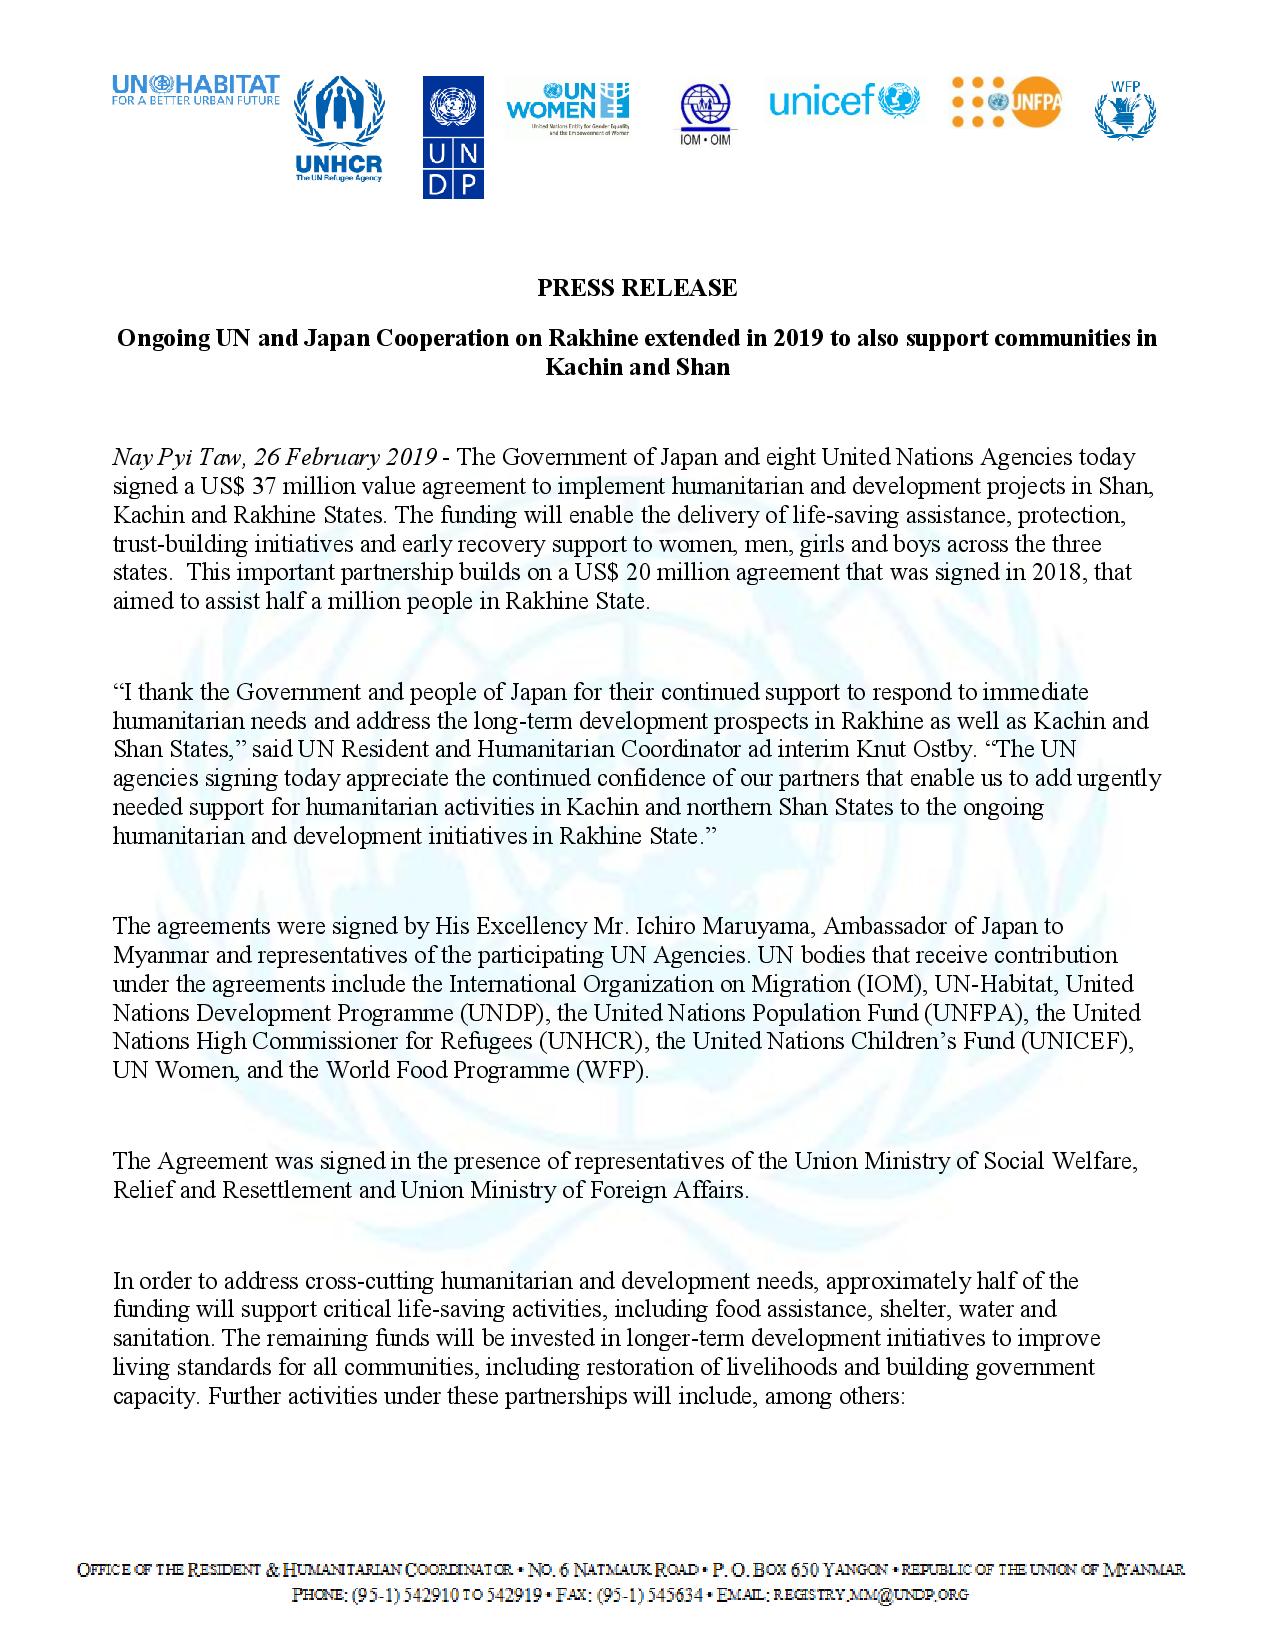 PRESS RELEASE – Myanmar: Ongoing UN and Japan Cooperation on Rakhine extended in 2019 to also support communities in Kachin and Shan (PDF)